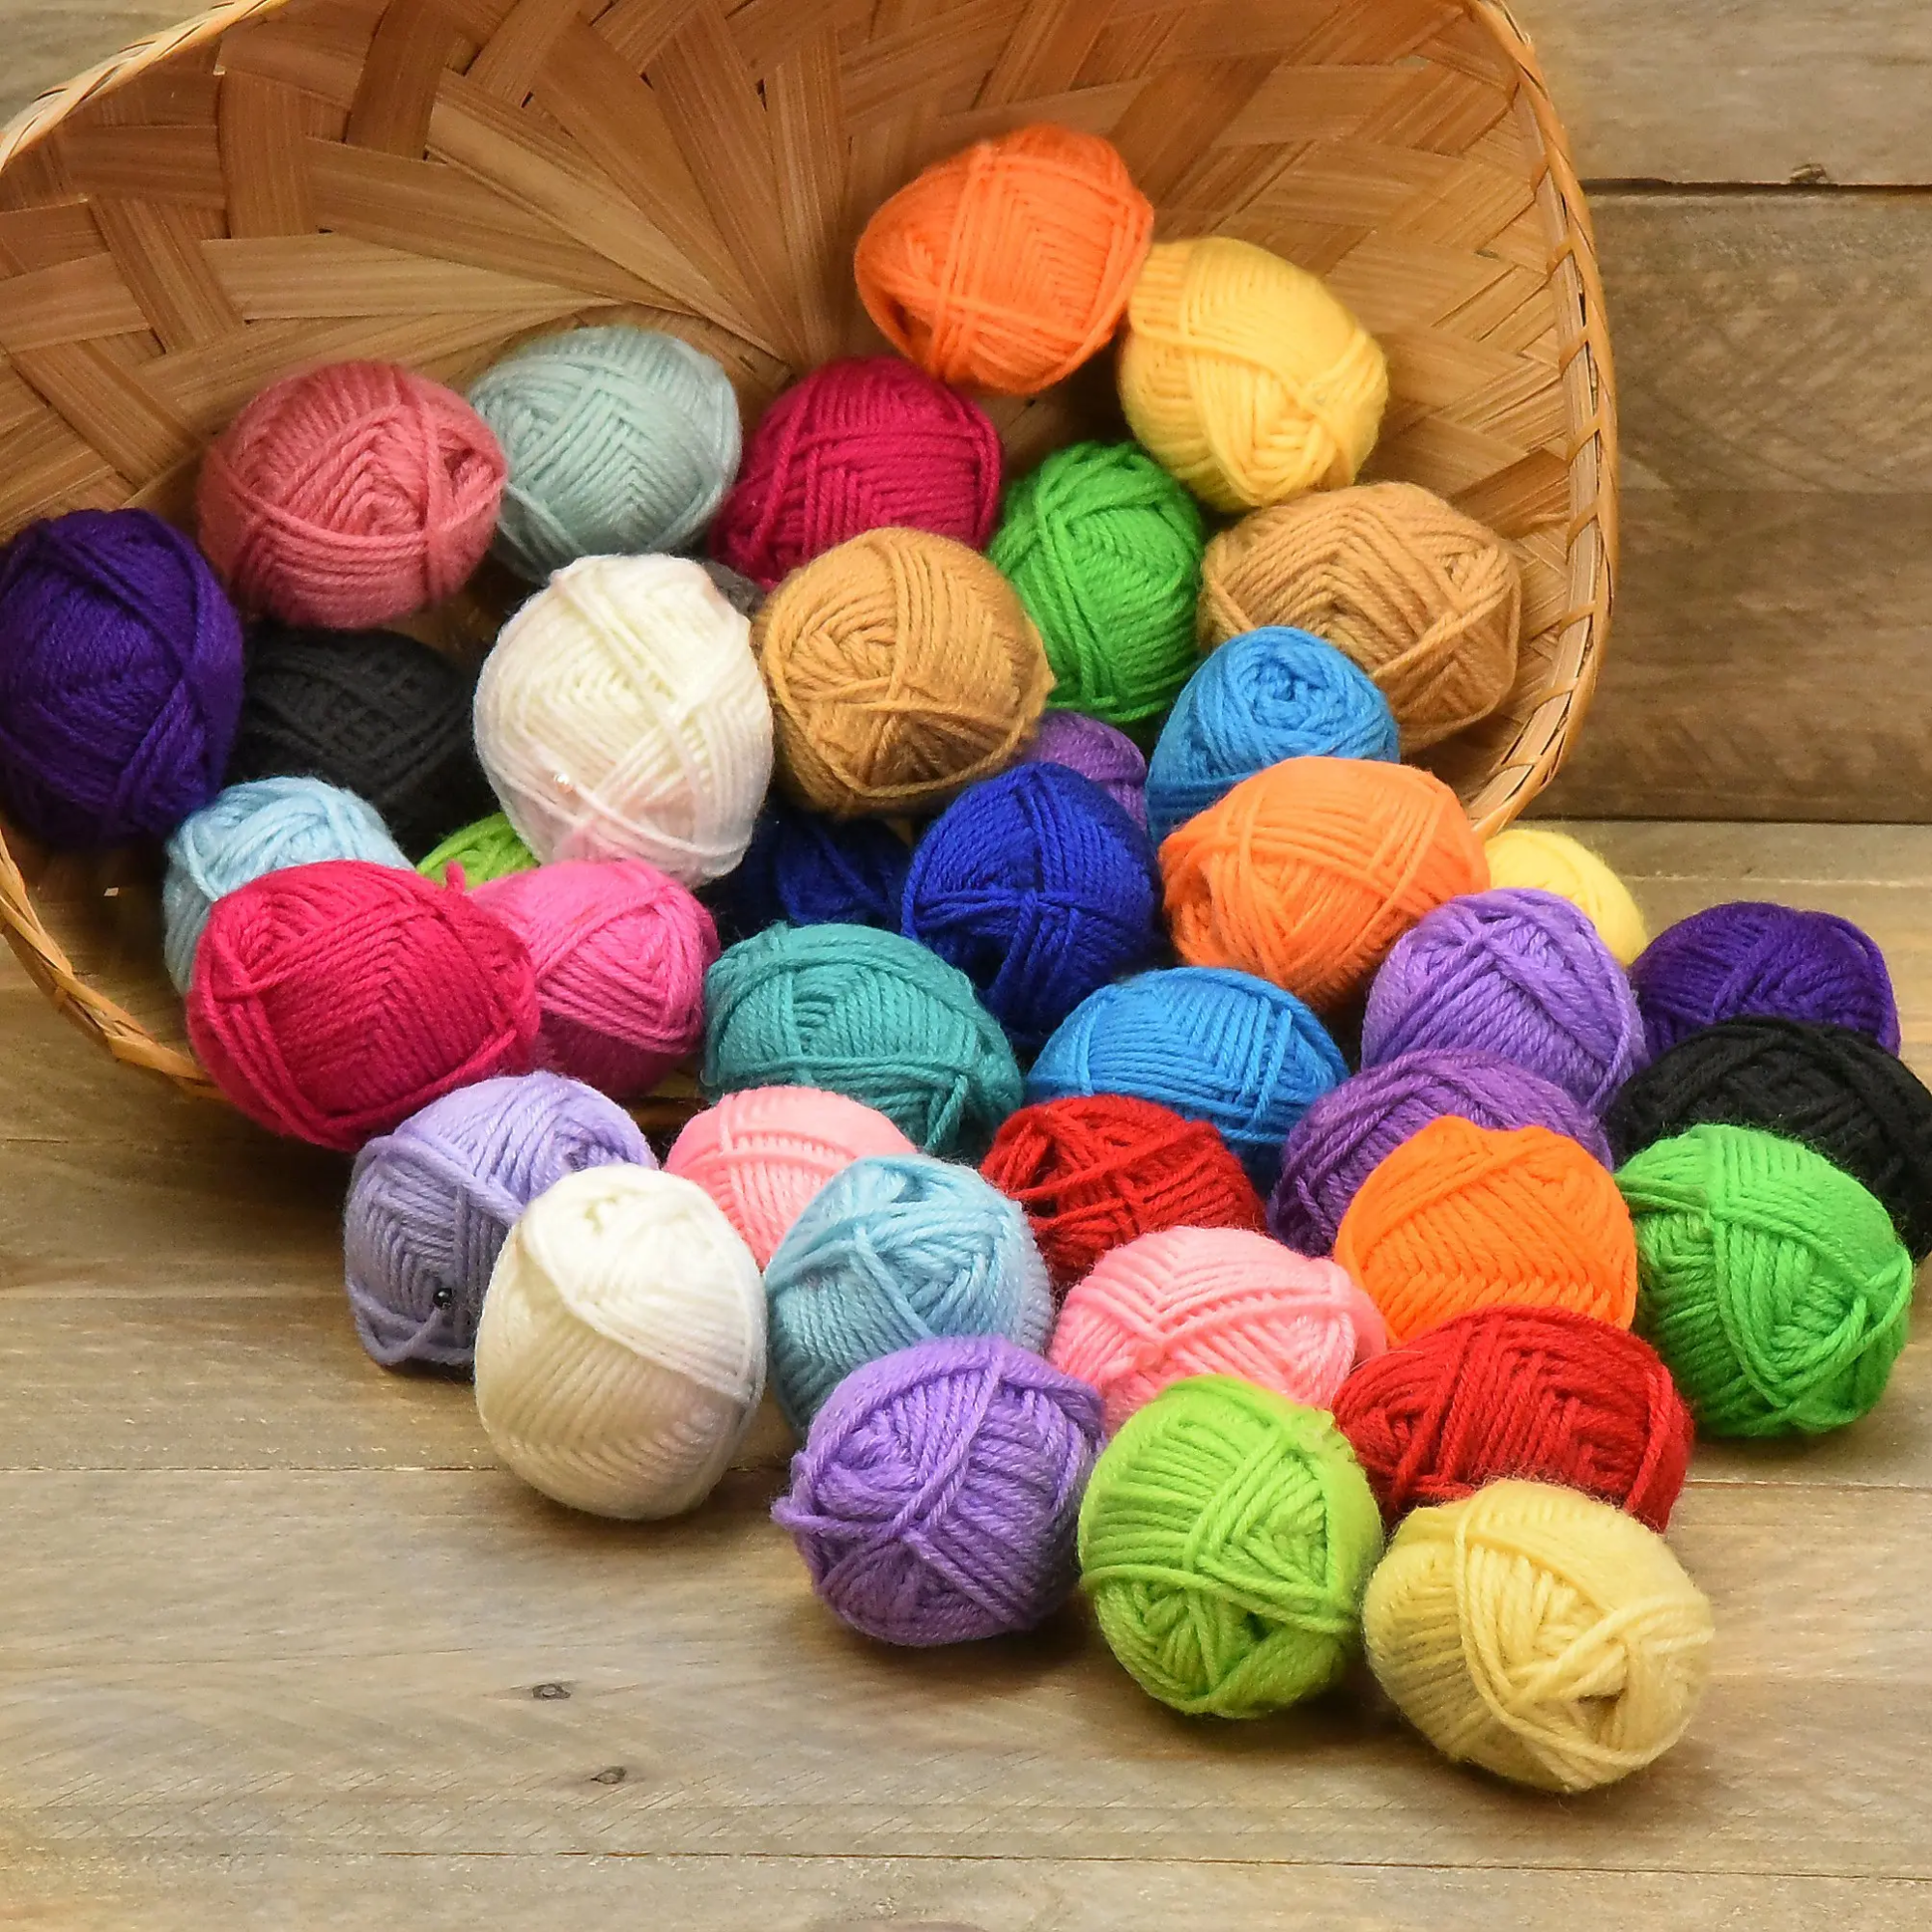 The Characteristics of Wool and Silk